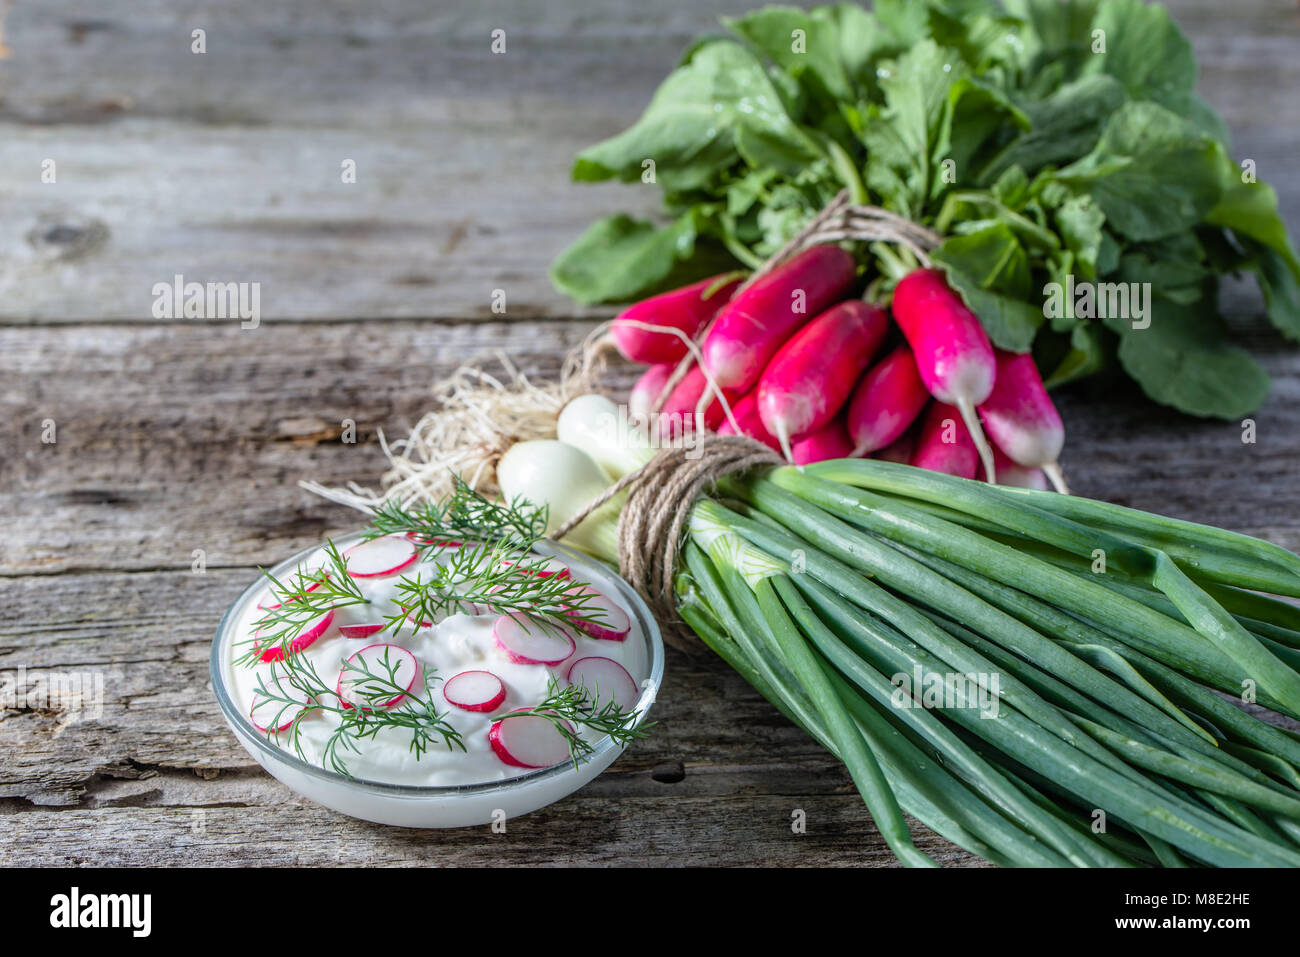 Dietary cottage cheese with radish, healthy eating concept Stock Photo